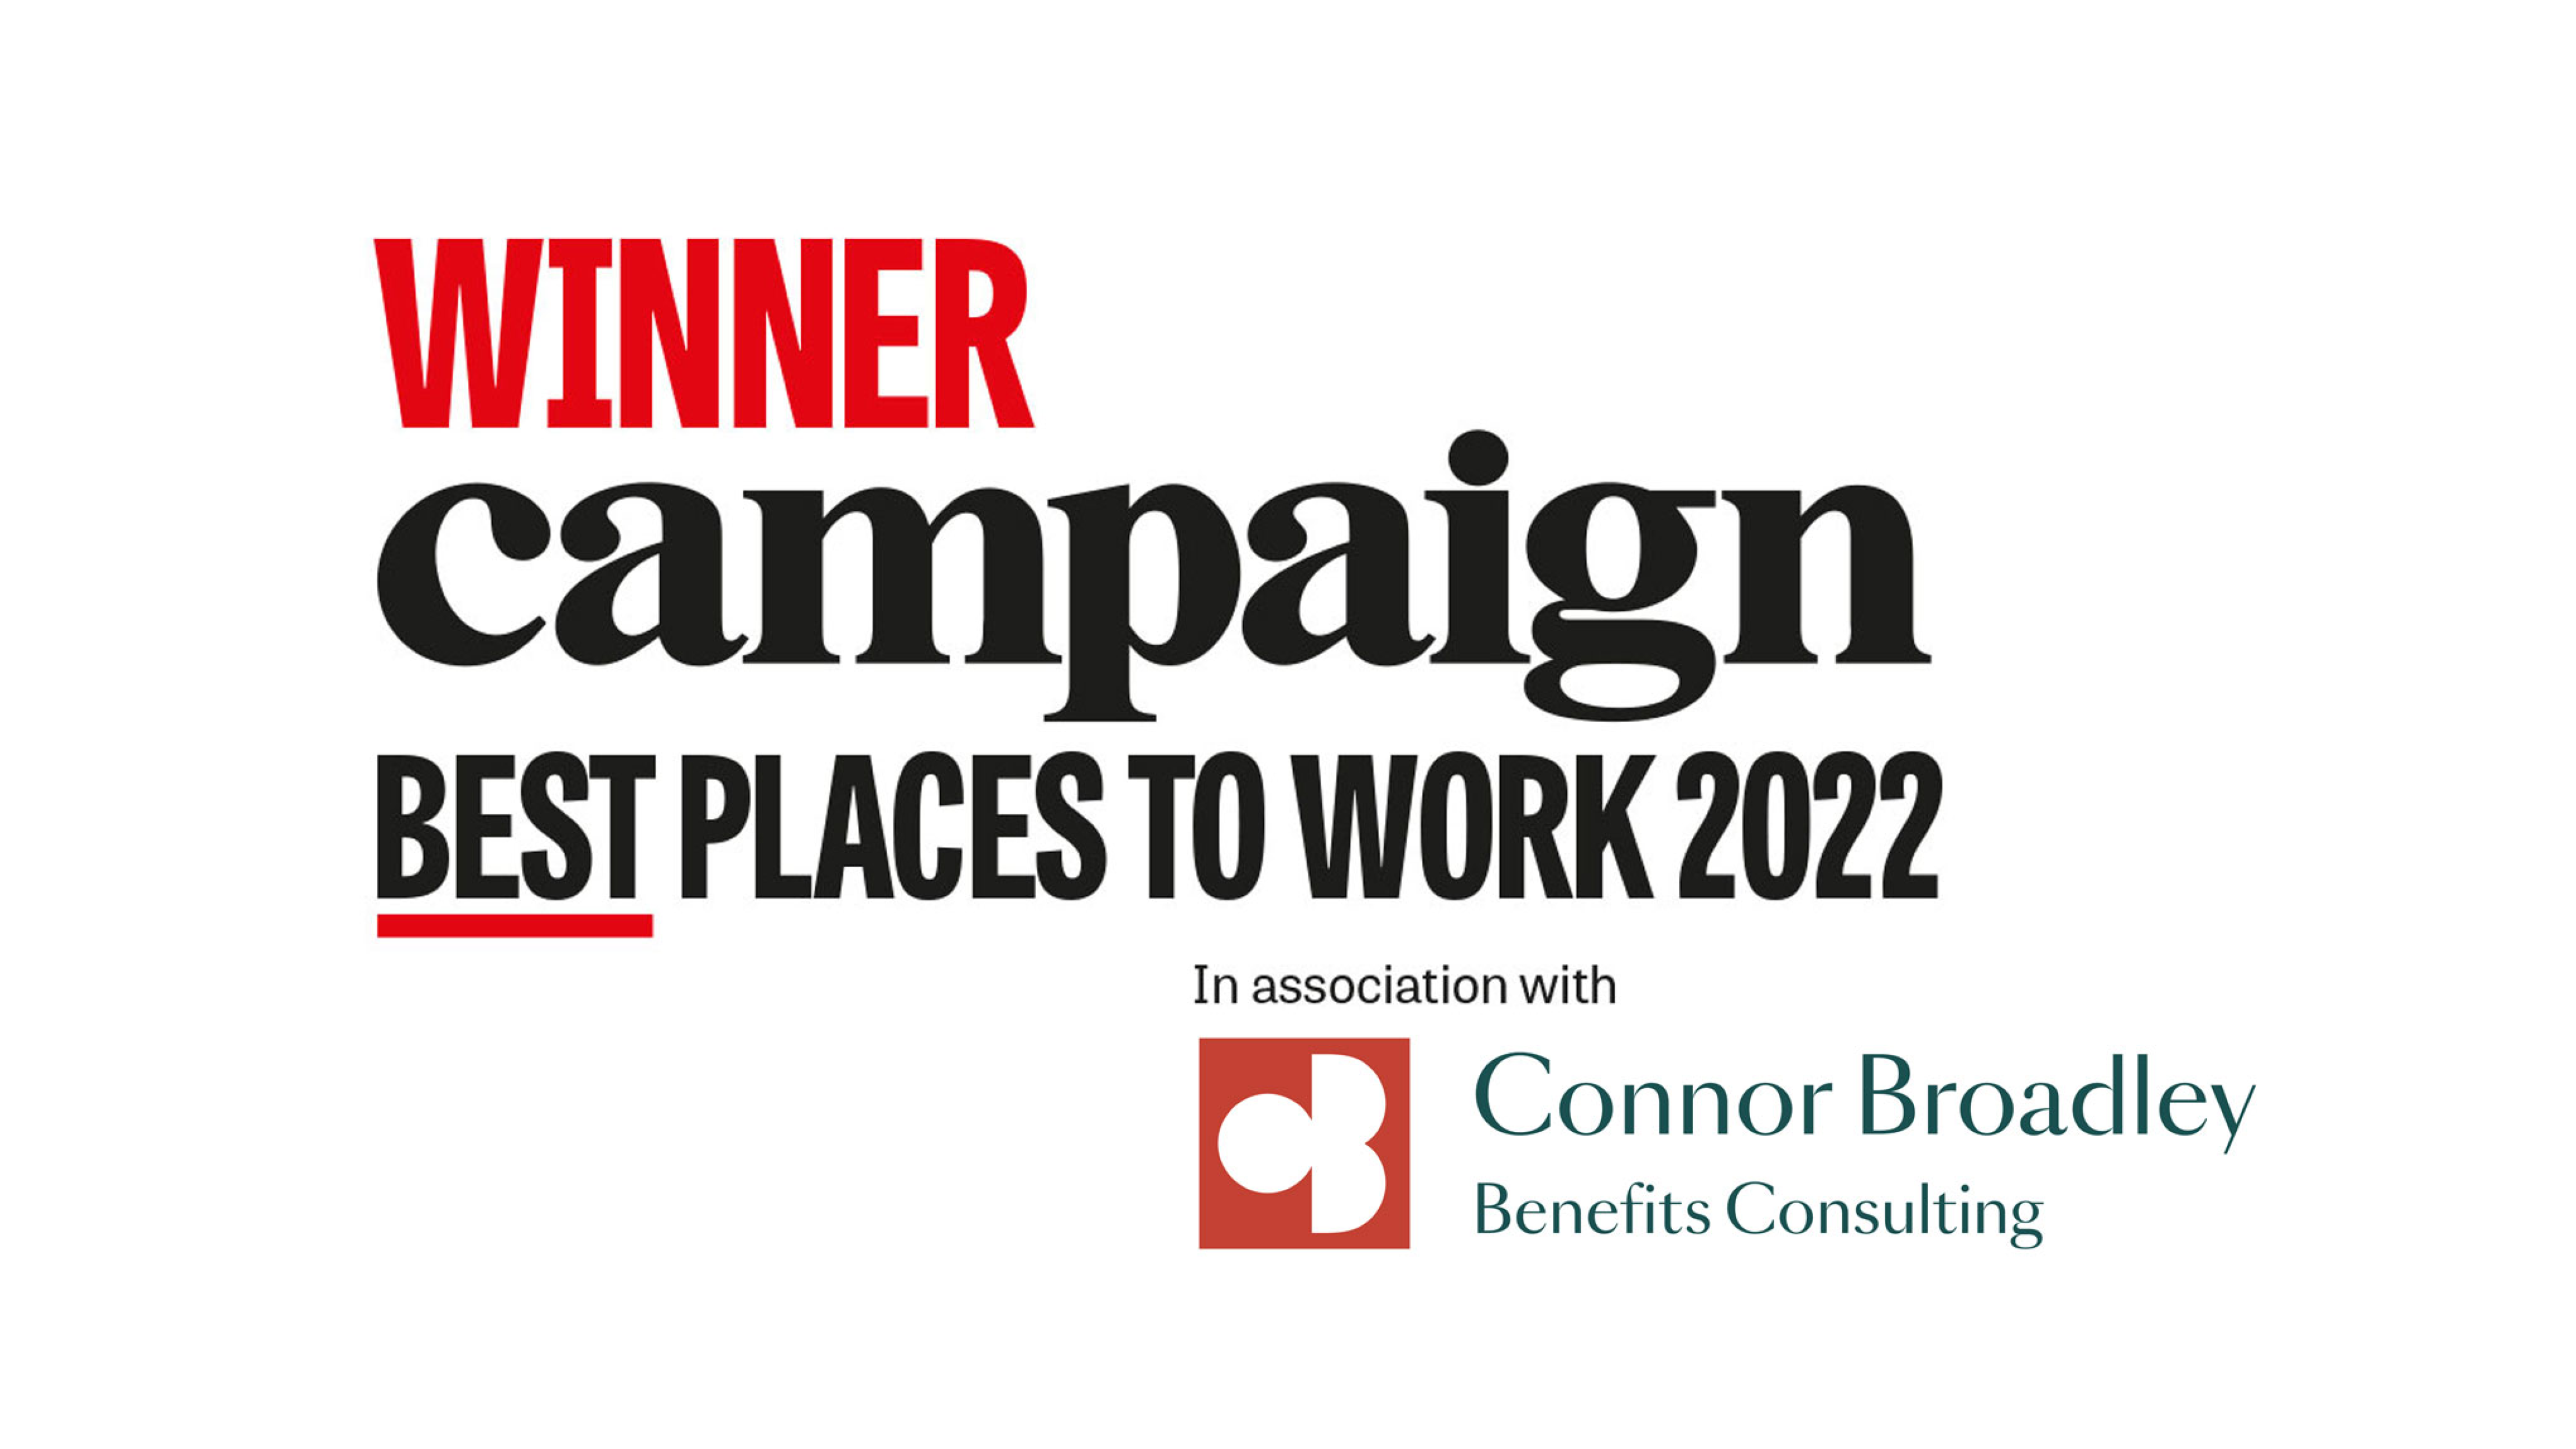 Medialab recognised as one of Campaign’s Best Places to Work